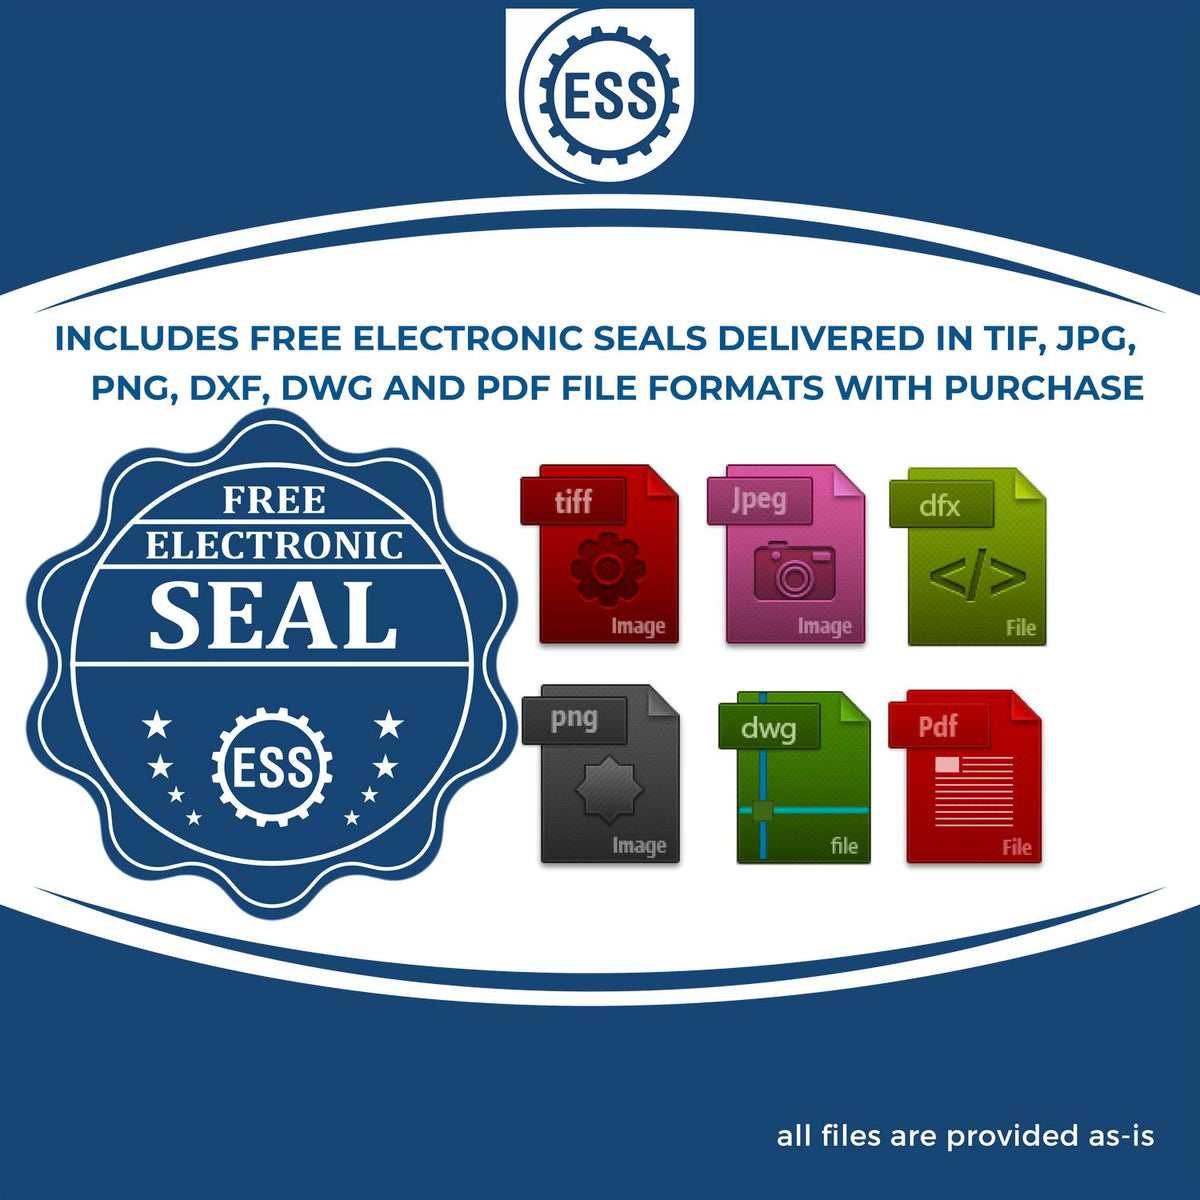 An infographic for the free electronic seal for the PSI North Carolina Notary Stamp illustrating the different file type icons such as DXF, DWG, TIF, JPG and PNG.